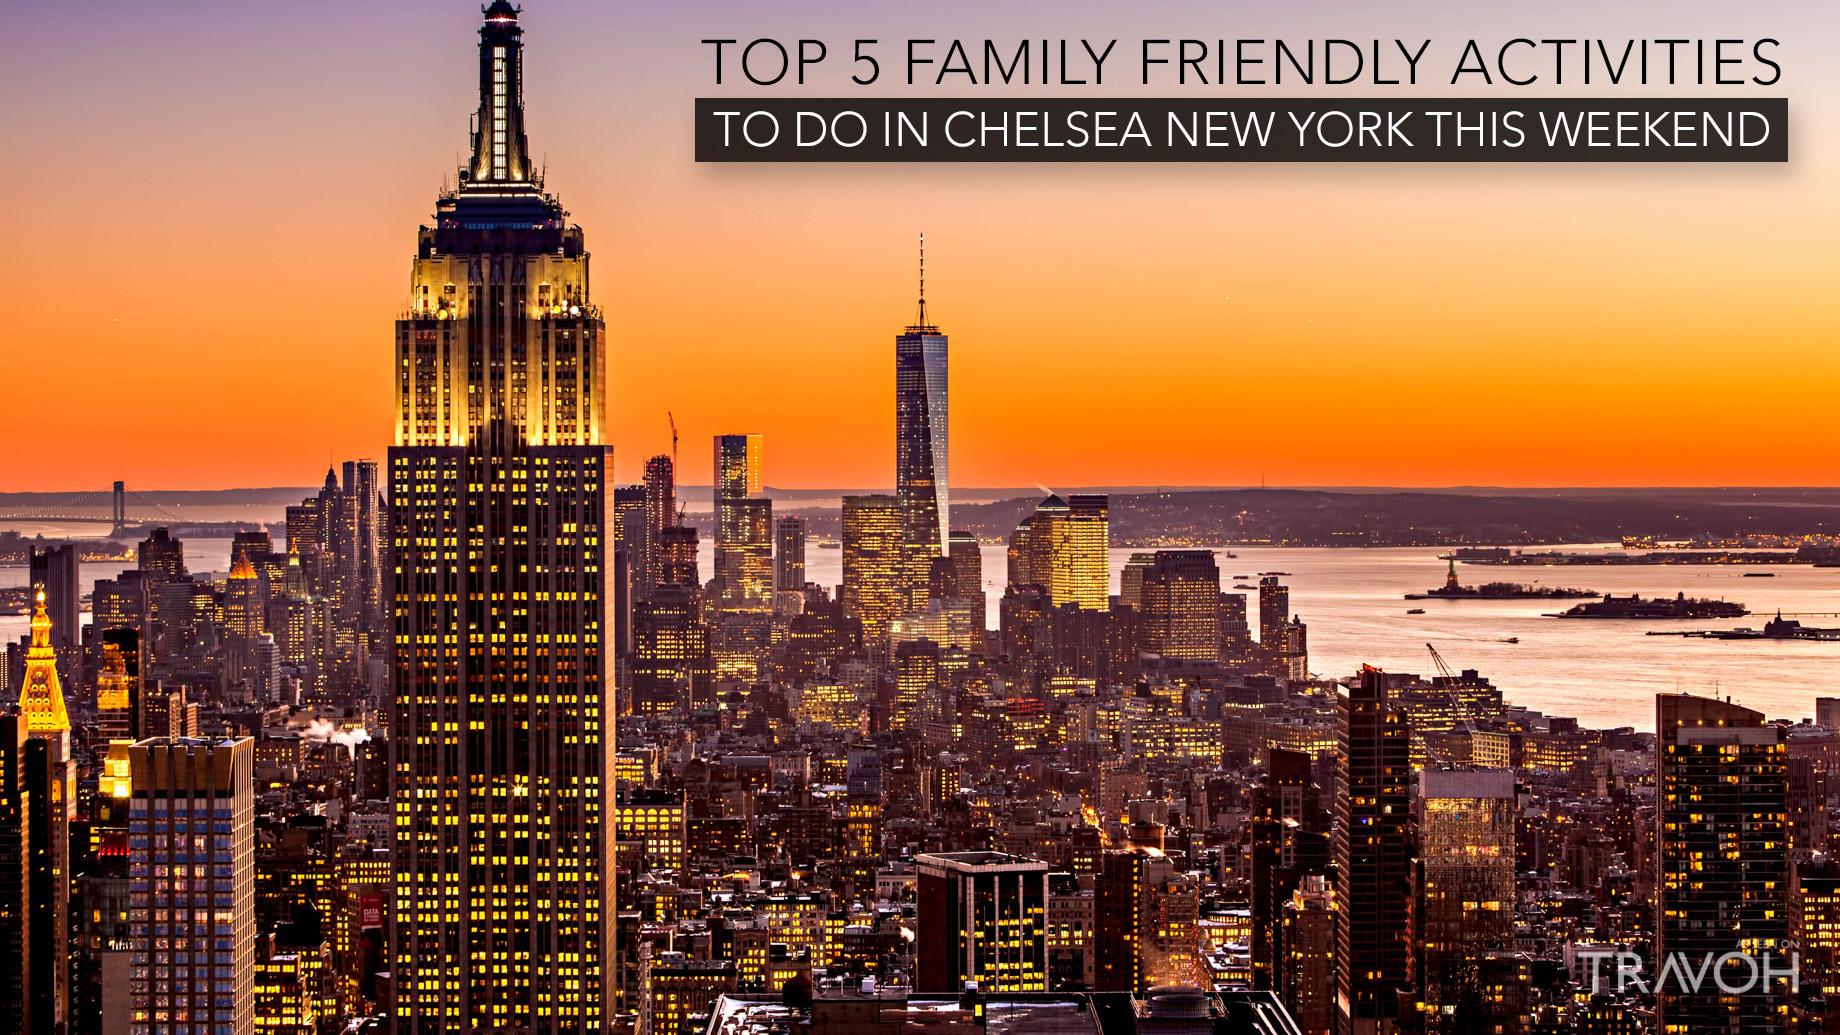 Top 5 Family-Friendly Activities To Do in Chelsea, New York This Weekend